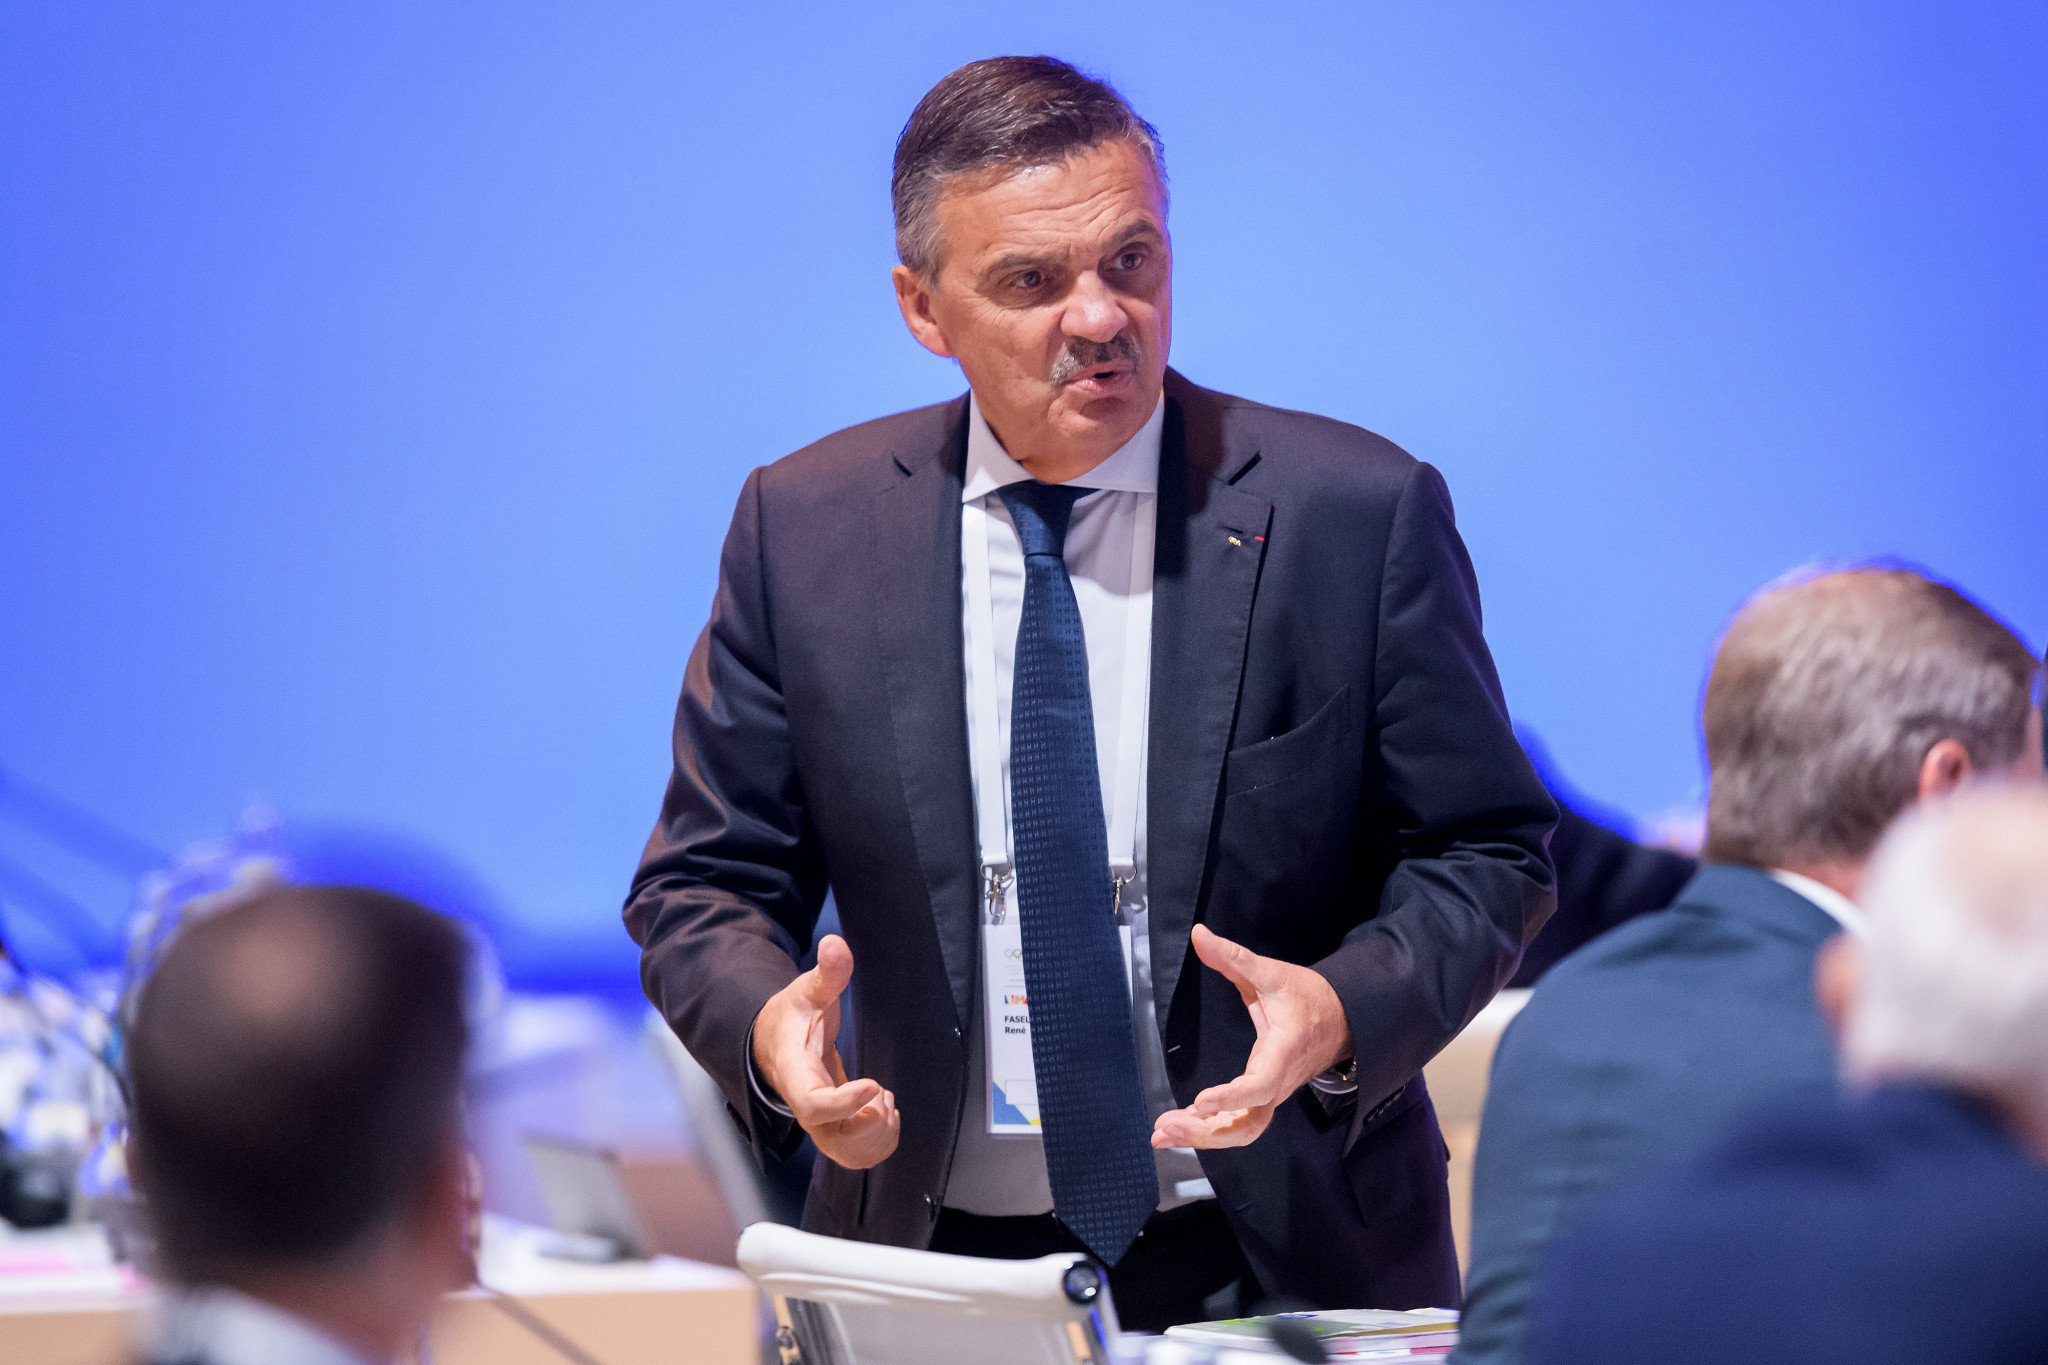 IIHF President says "too early" to make conclusions on 2021 Ice Hockey World Championships